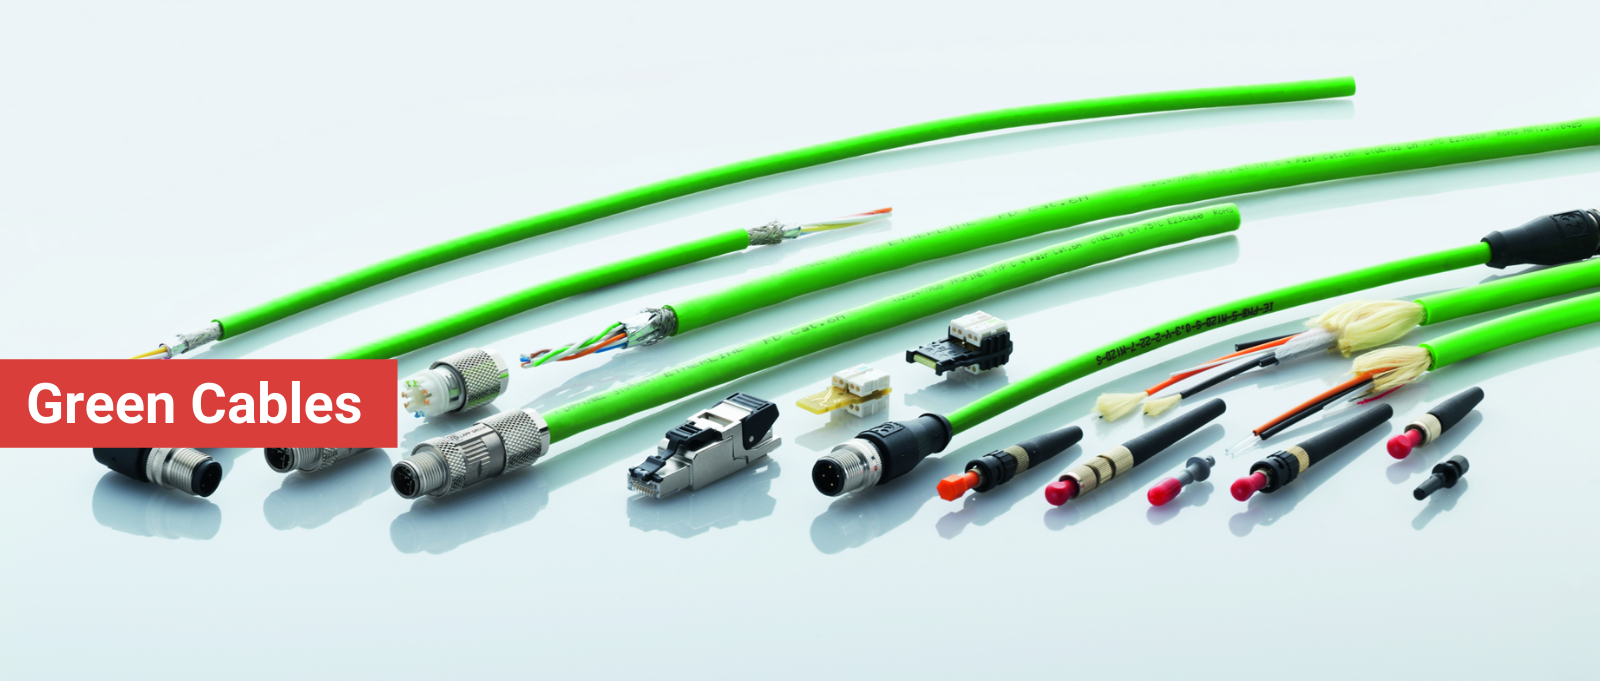 Manufacturers of Green Cables in Mumbai